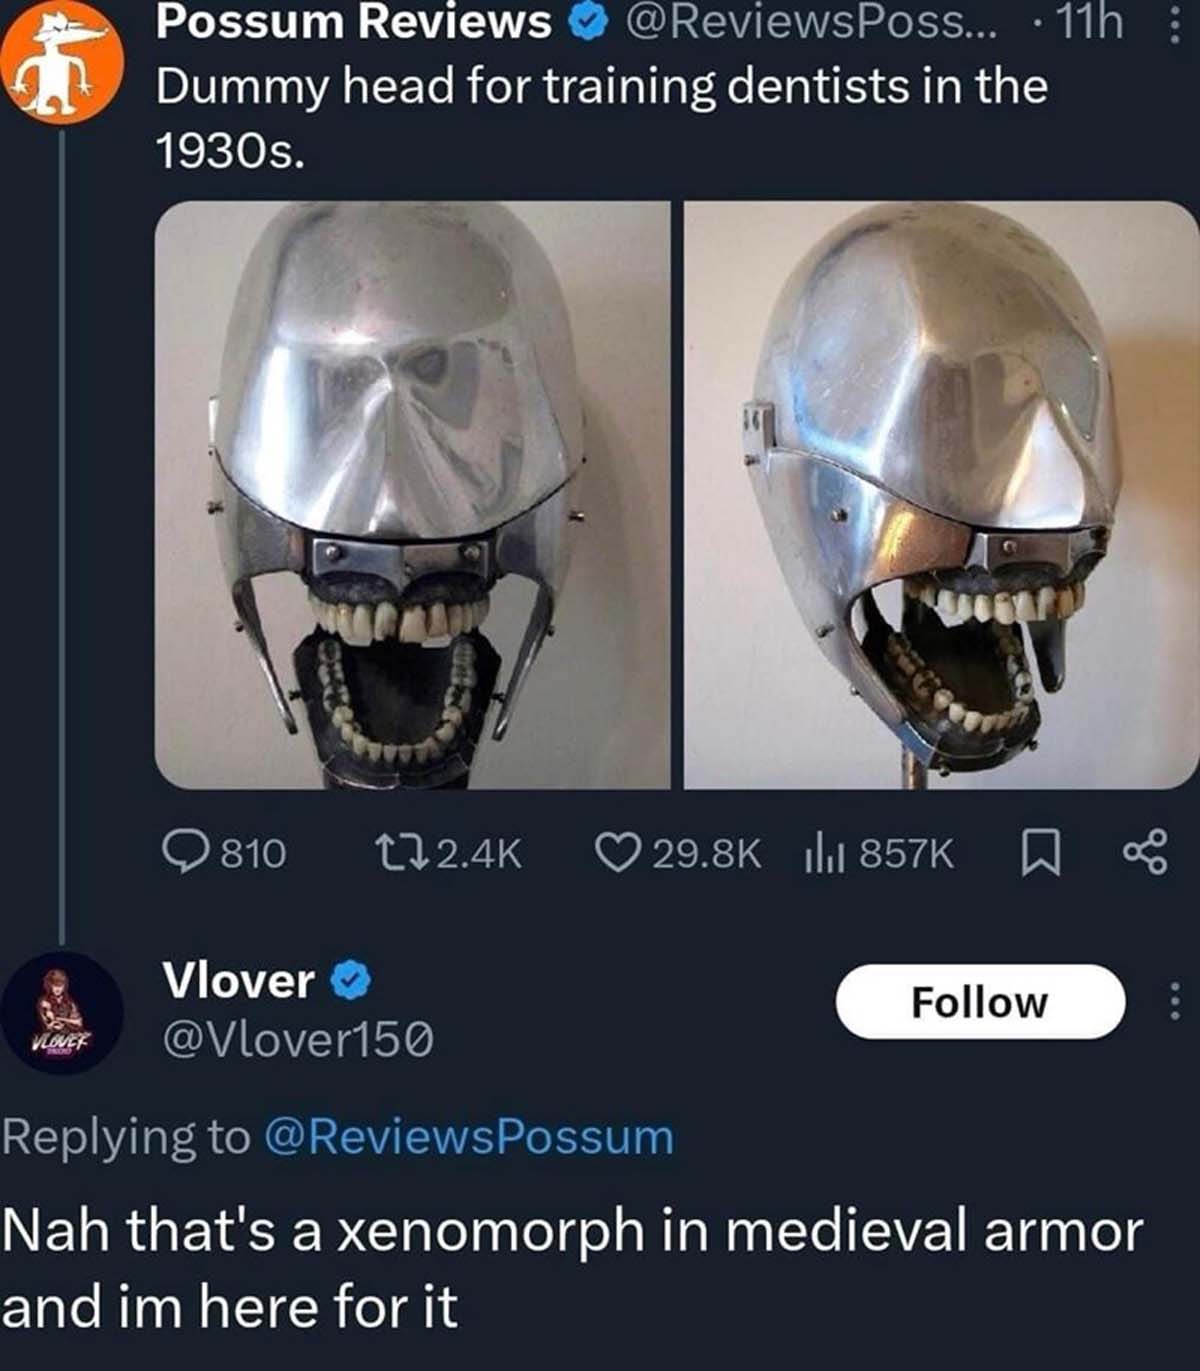 dental phantoms - Possum Reviews Poss... 11h ....11h Dummy head for training dentists in the 1930s. 810 Vlover> Vlover Nah that's a xenomorph in medieval armor and im here for it